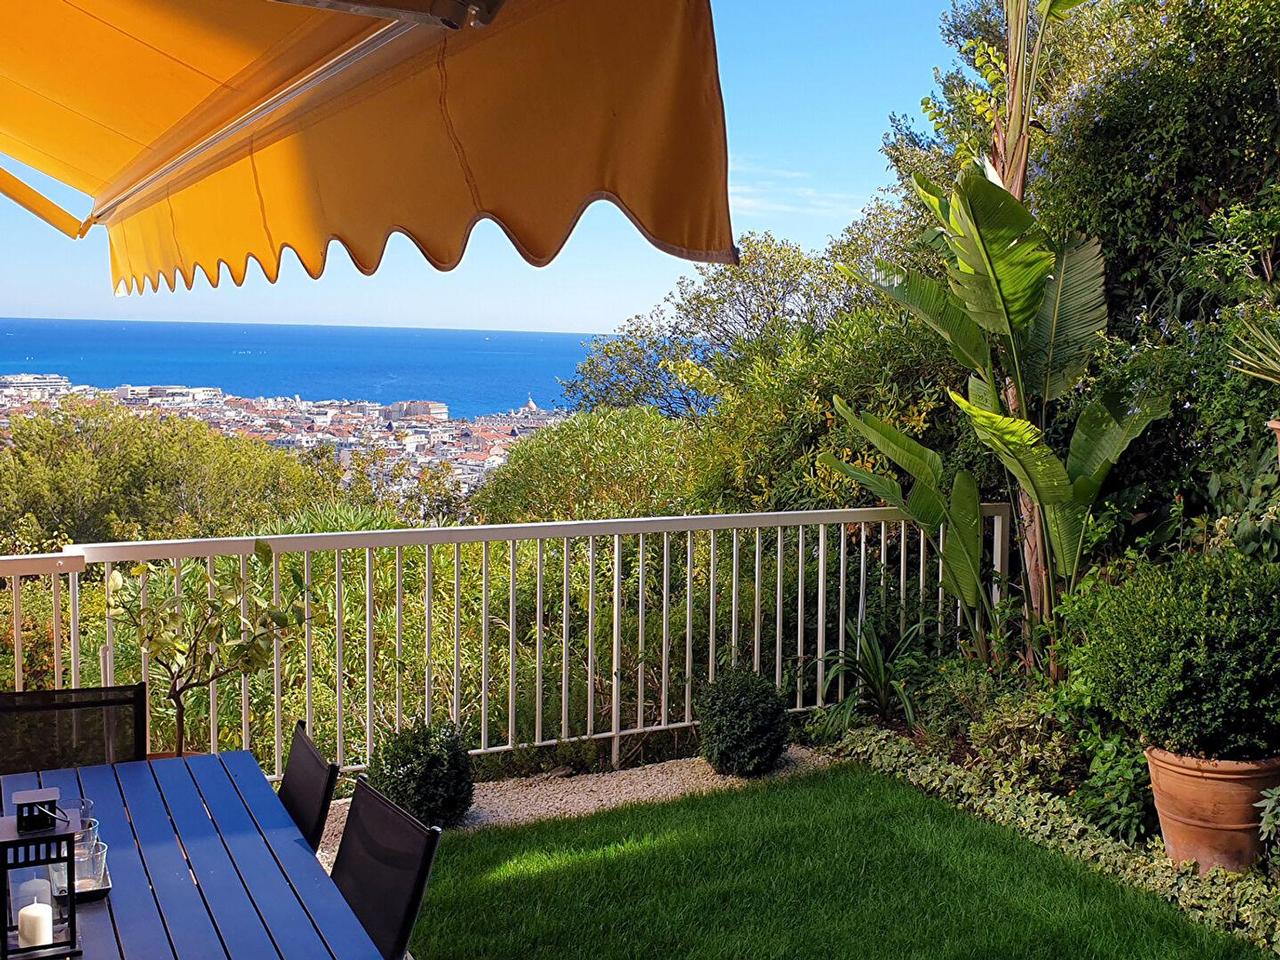 Nice Riviera - Real estate agency Nice Côte d'Azur | Appartement  2 Rooms 45.74m2  for sale   360 000 €